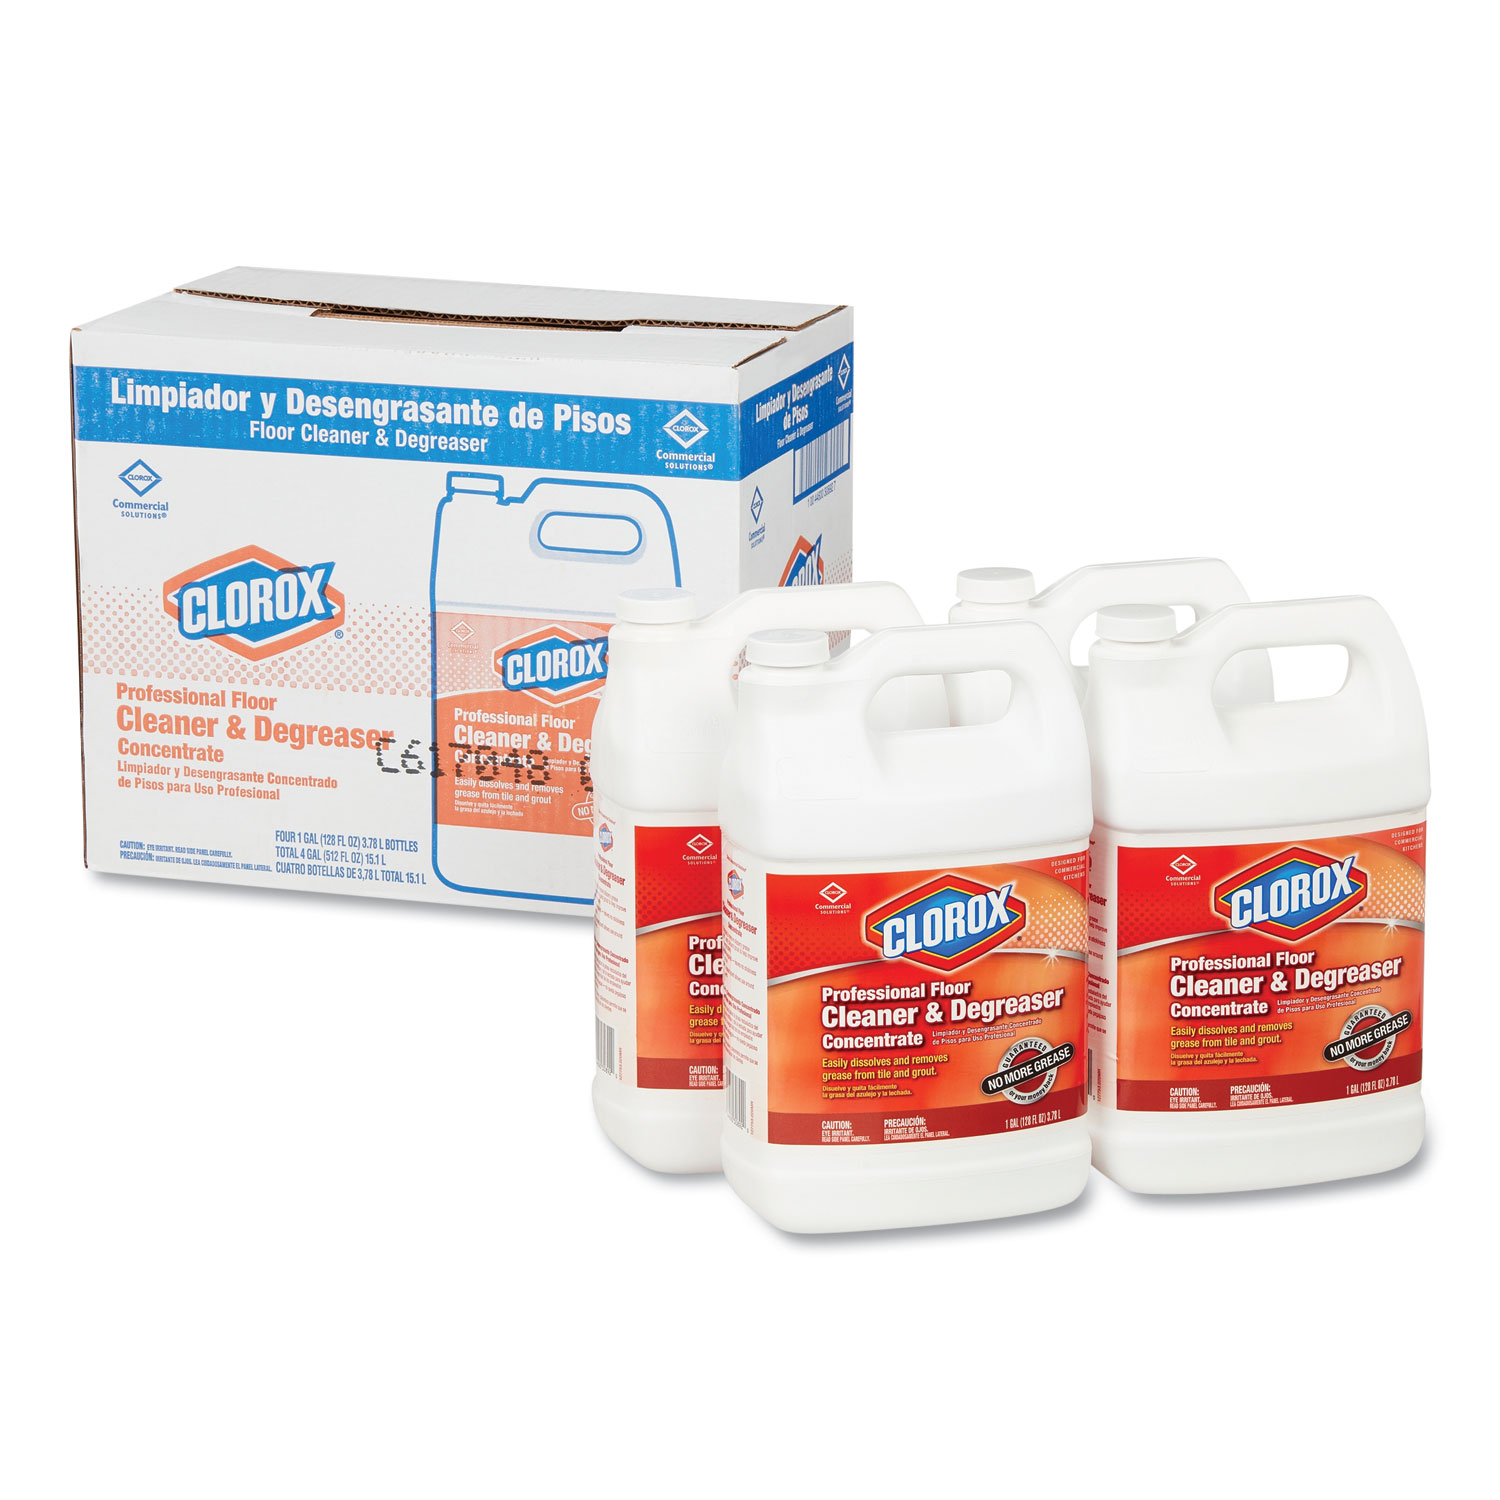  Clorox CLO 30892 Professional Floor Cleaner and Degreaser Concentrate, 1 gal Bottle, 4/Carton (CLO30892CT) 